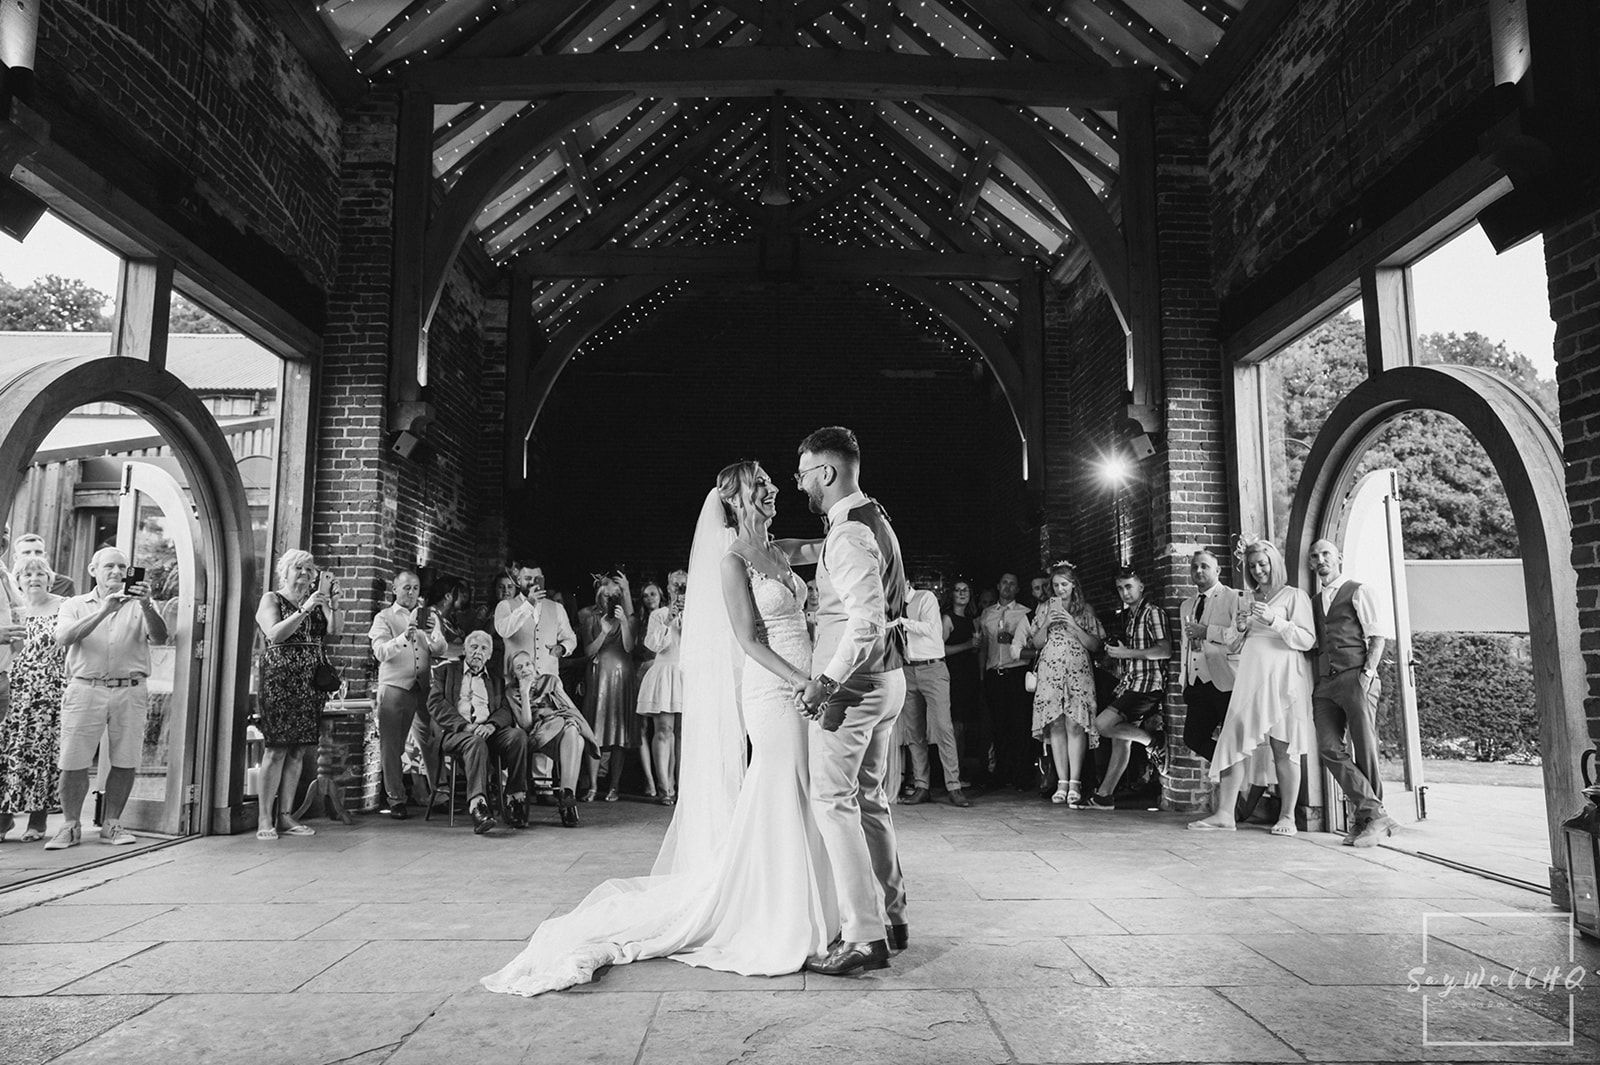 Wedding Photography First dance photos - bride and groom first dance in a converted barn
